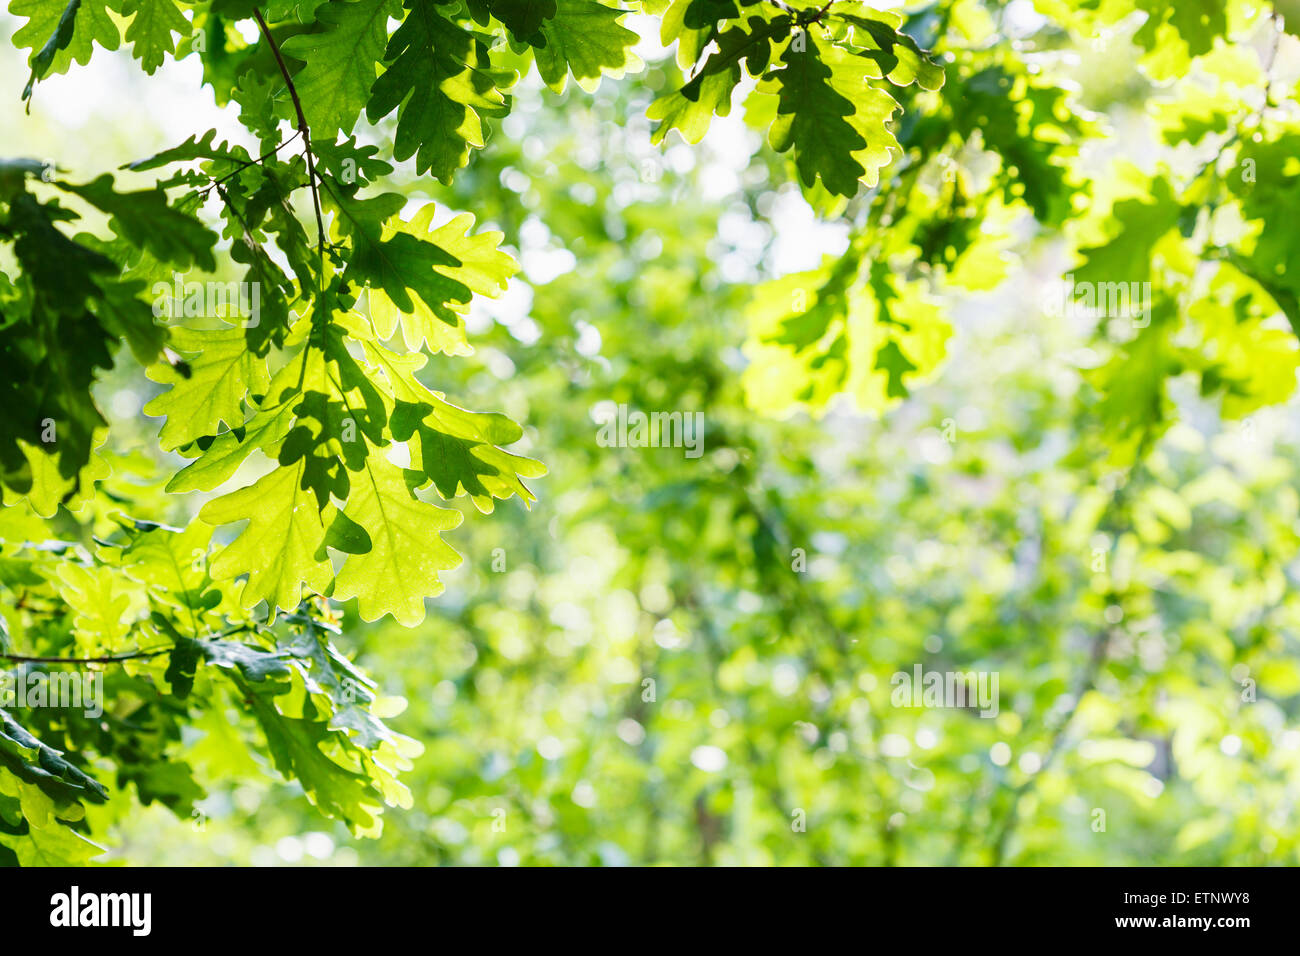 natural background - green oak foliage in summer sunny day Stock Photo